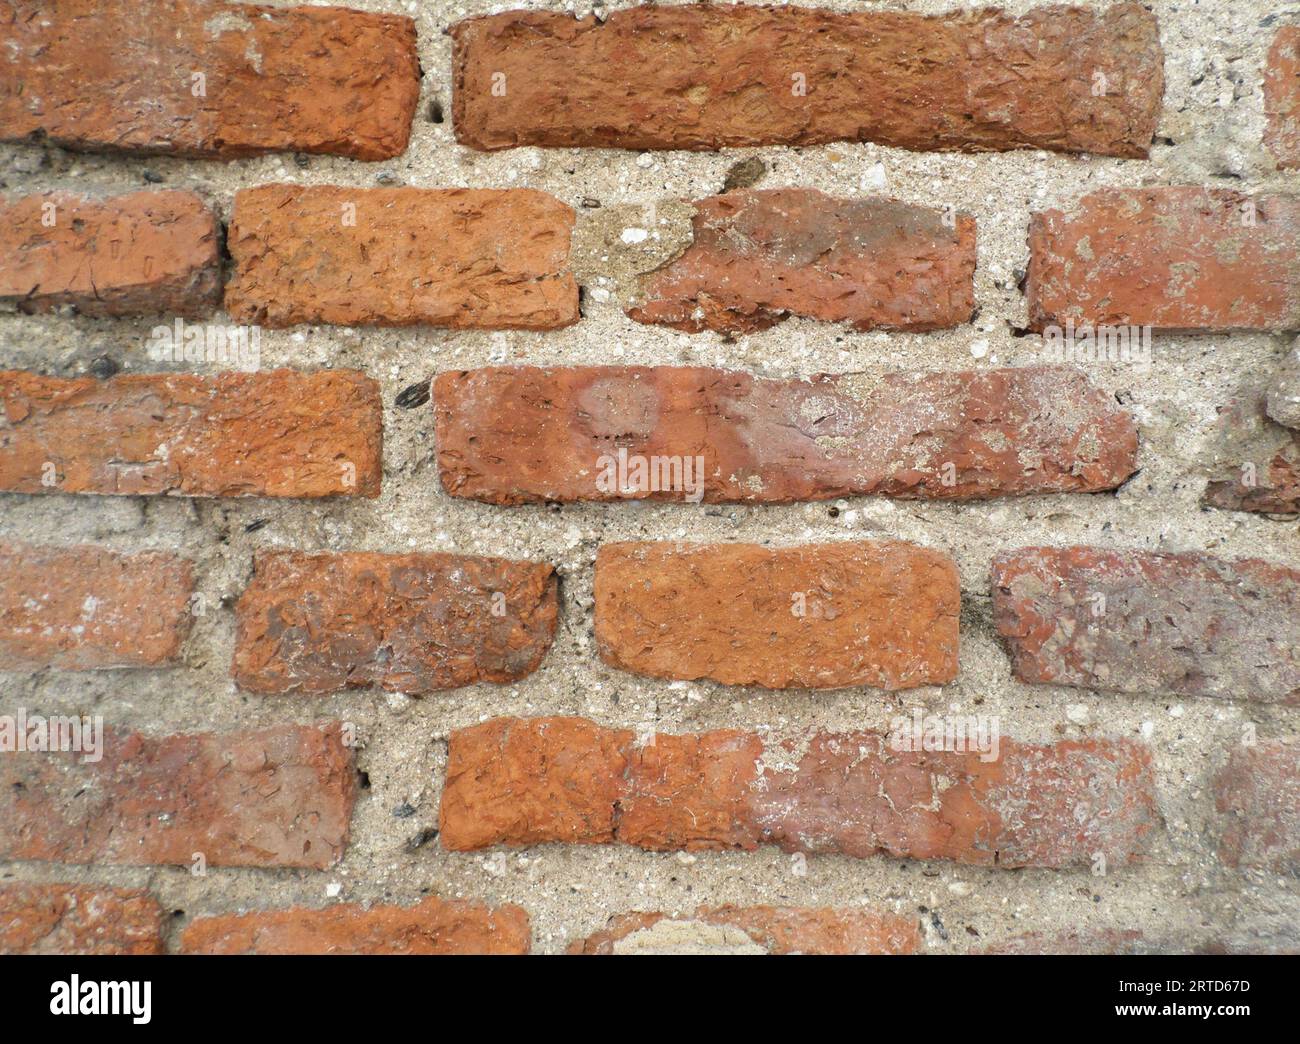 cracked cement brick block surface as background for design Stock Photo